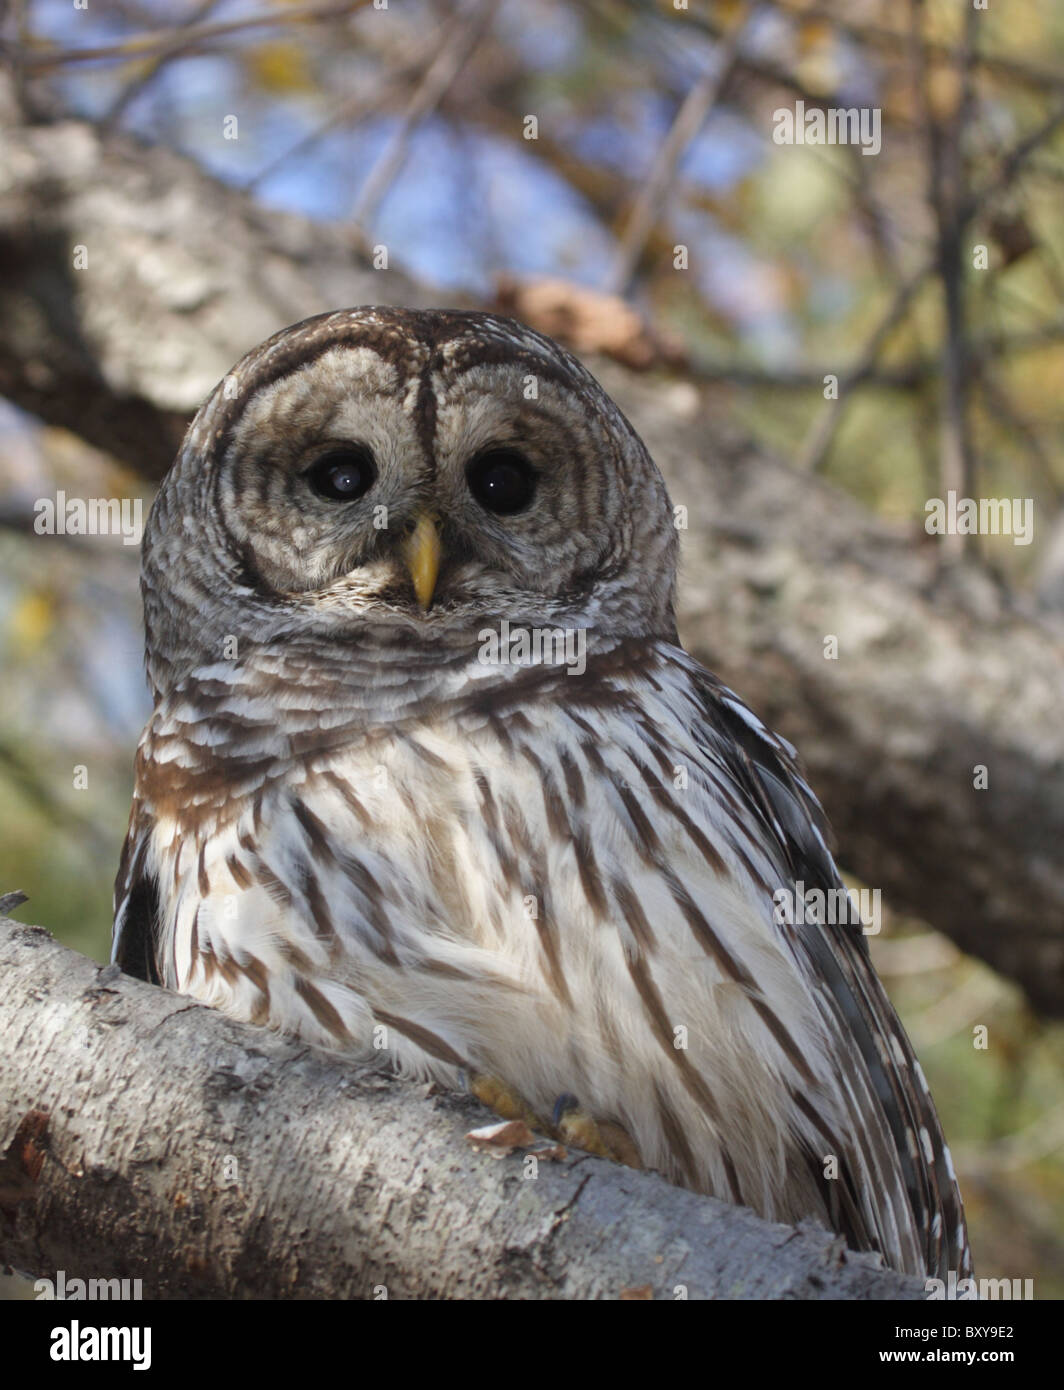 Wild Barred Owl (Strix varia)  with evidence of eye disease. Dutch Gap conservation area, Chesterfield County, Virginia 2010 Stock Photo